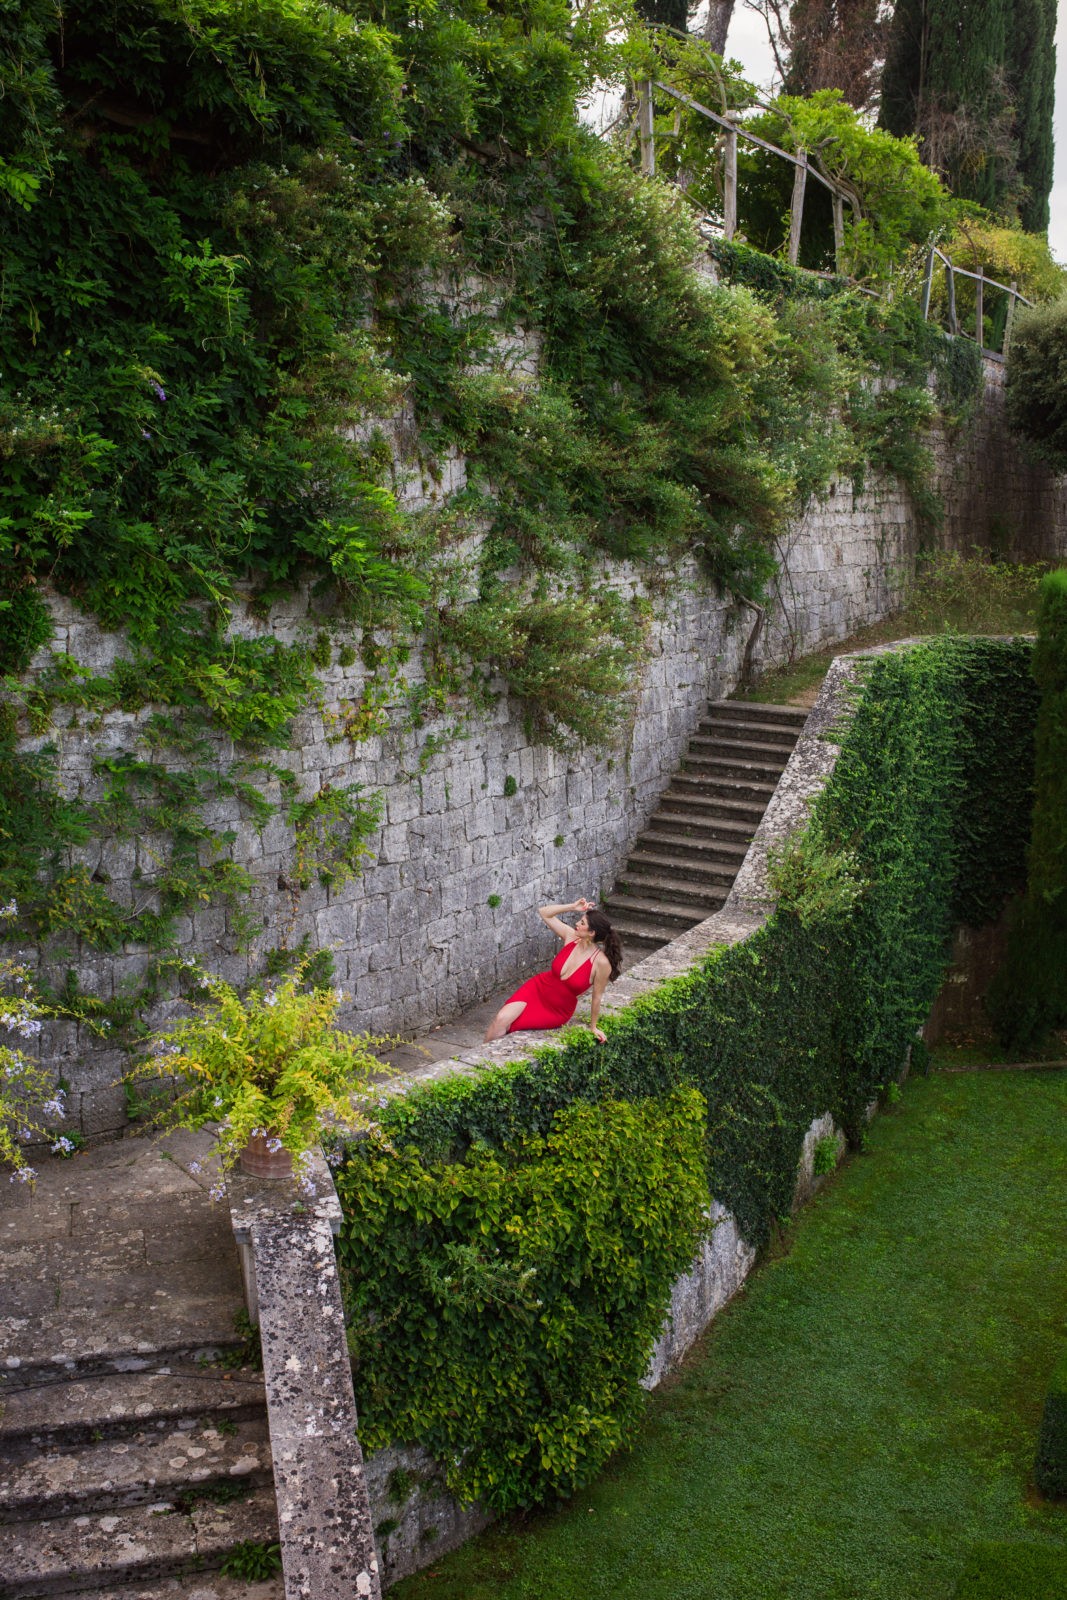 La Foce by Fashion Blogger Laura Lily, - La Foce Gardens in Italy featured by top Los Angeles travel blog, Laura LIly